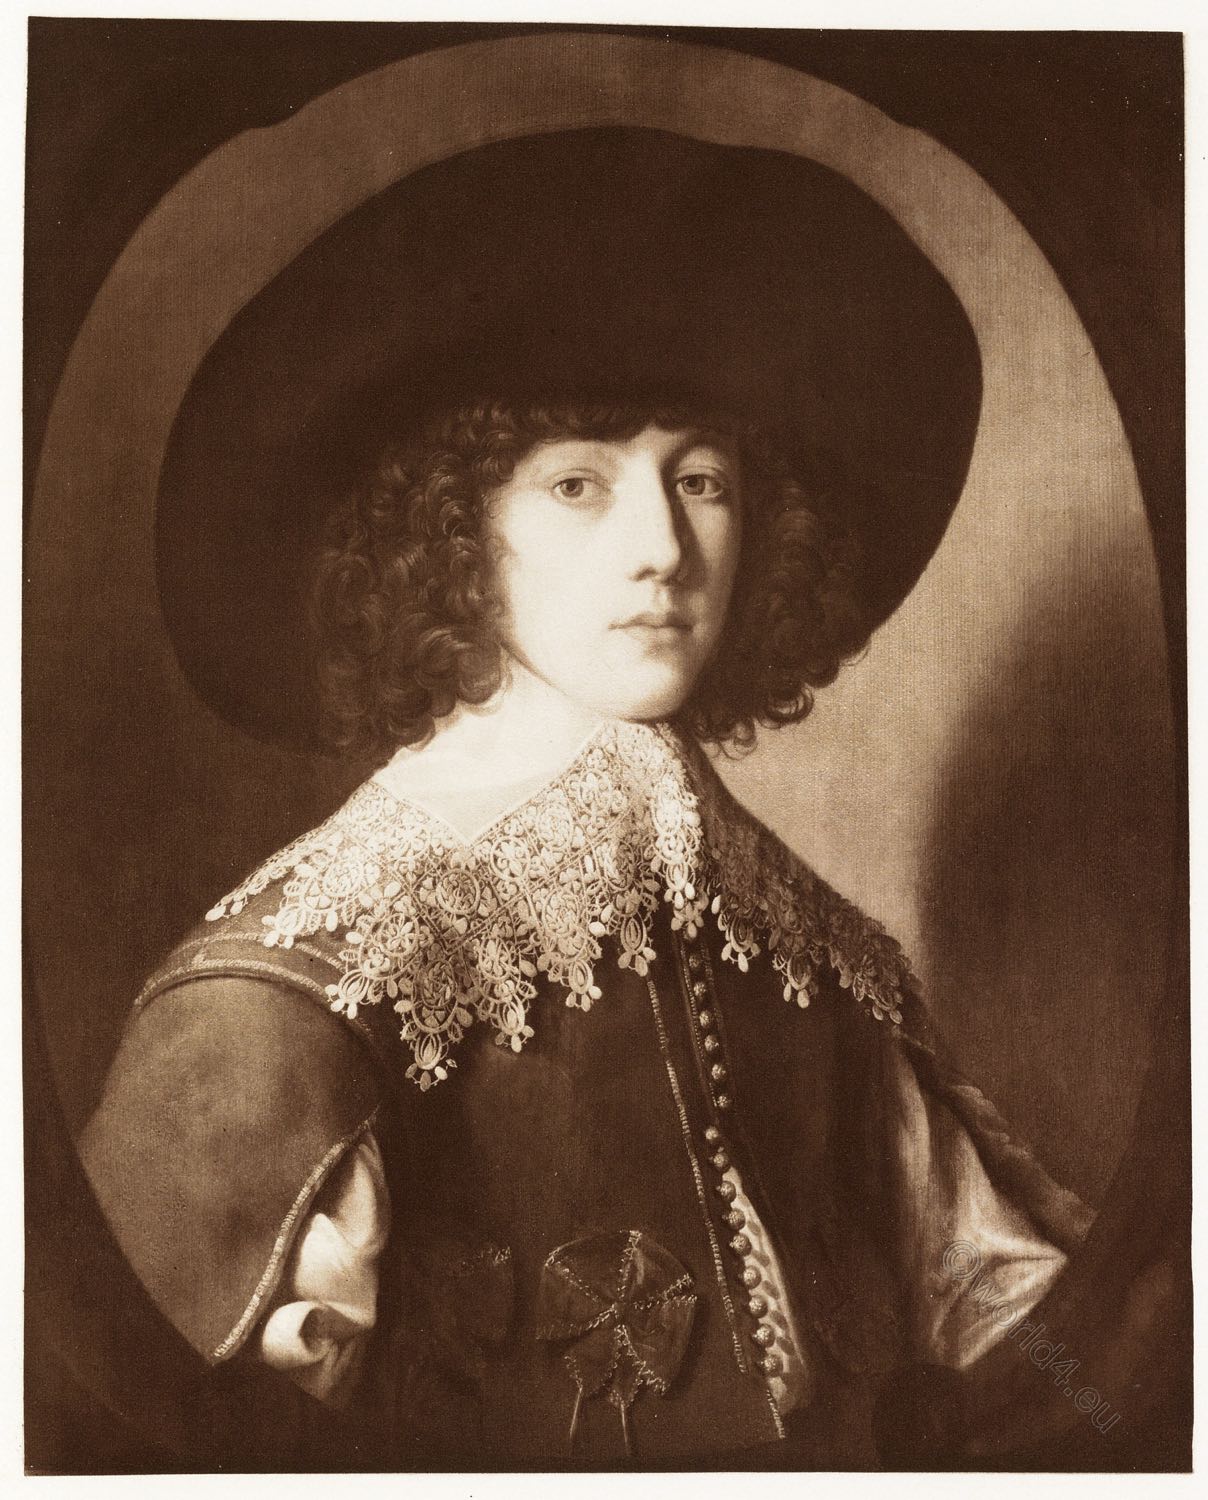 Prince Rupert, Count Palatine of the Rhine, Wilton House, Collection, Baroque, nobility, England